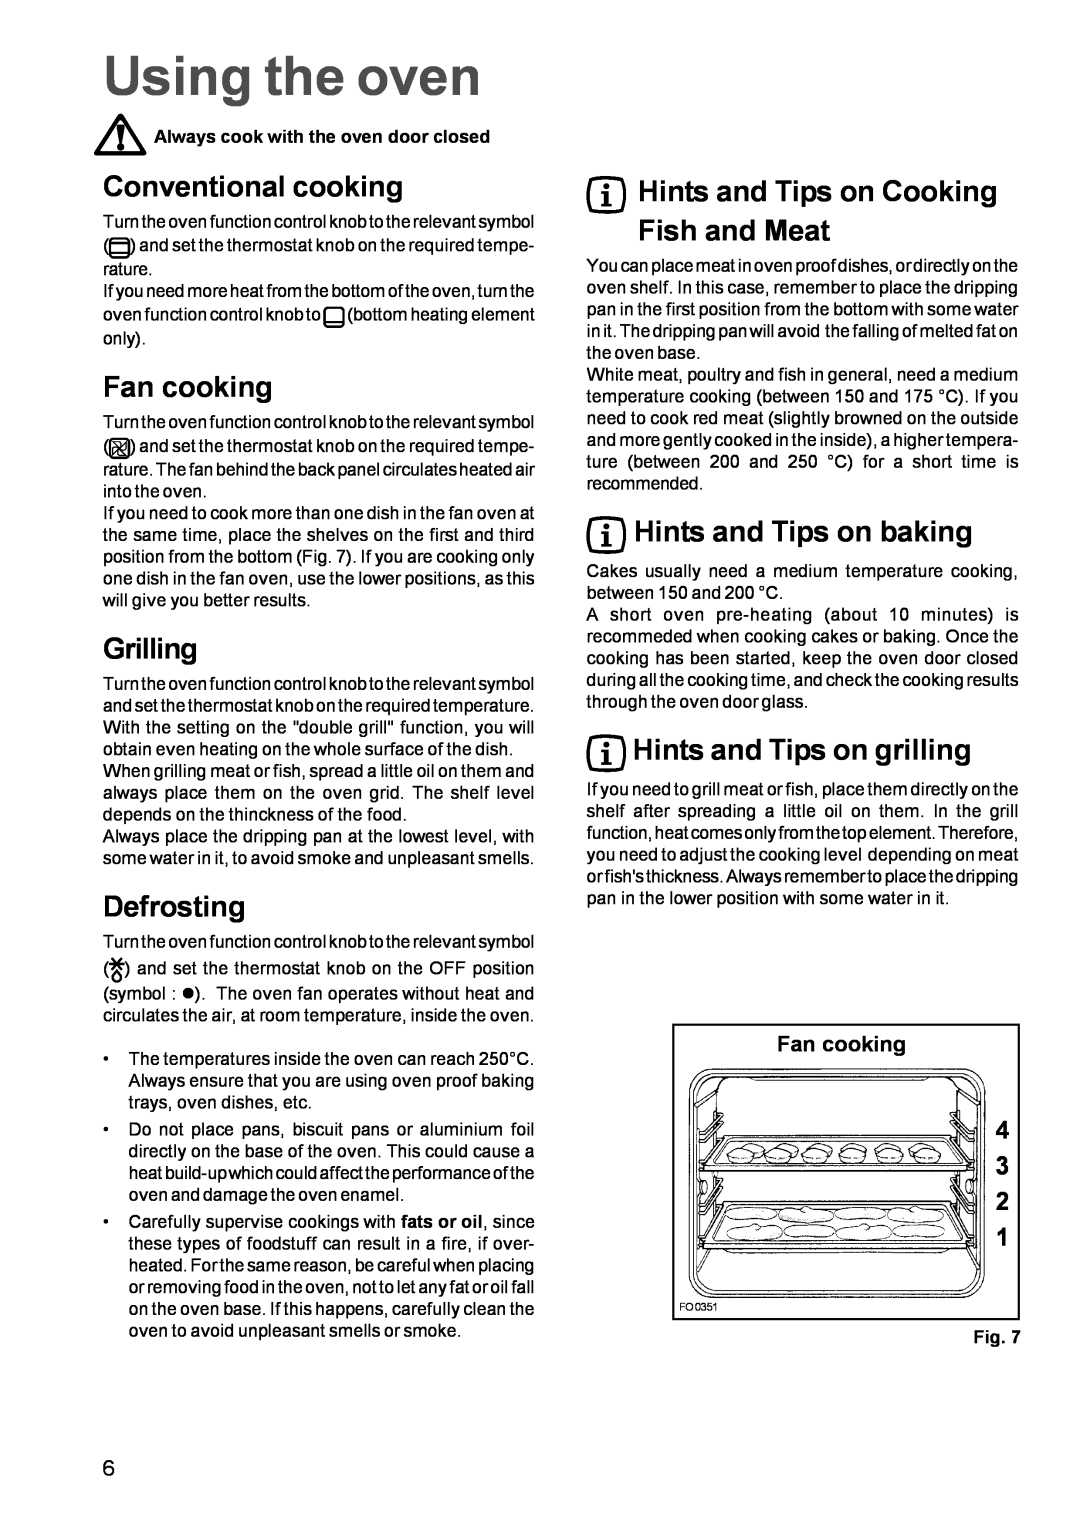 Zanussi ZBF 610 manual Using the oven, Conventional cooking, Fan cooking, Grilling, Defrosting, Hints and Tips on baking 